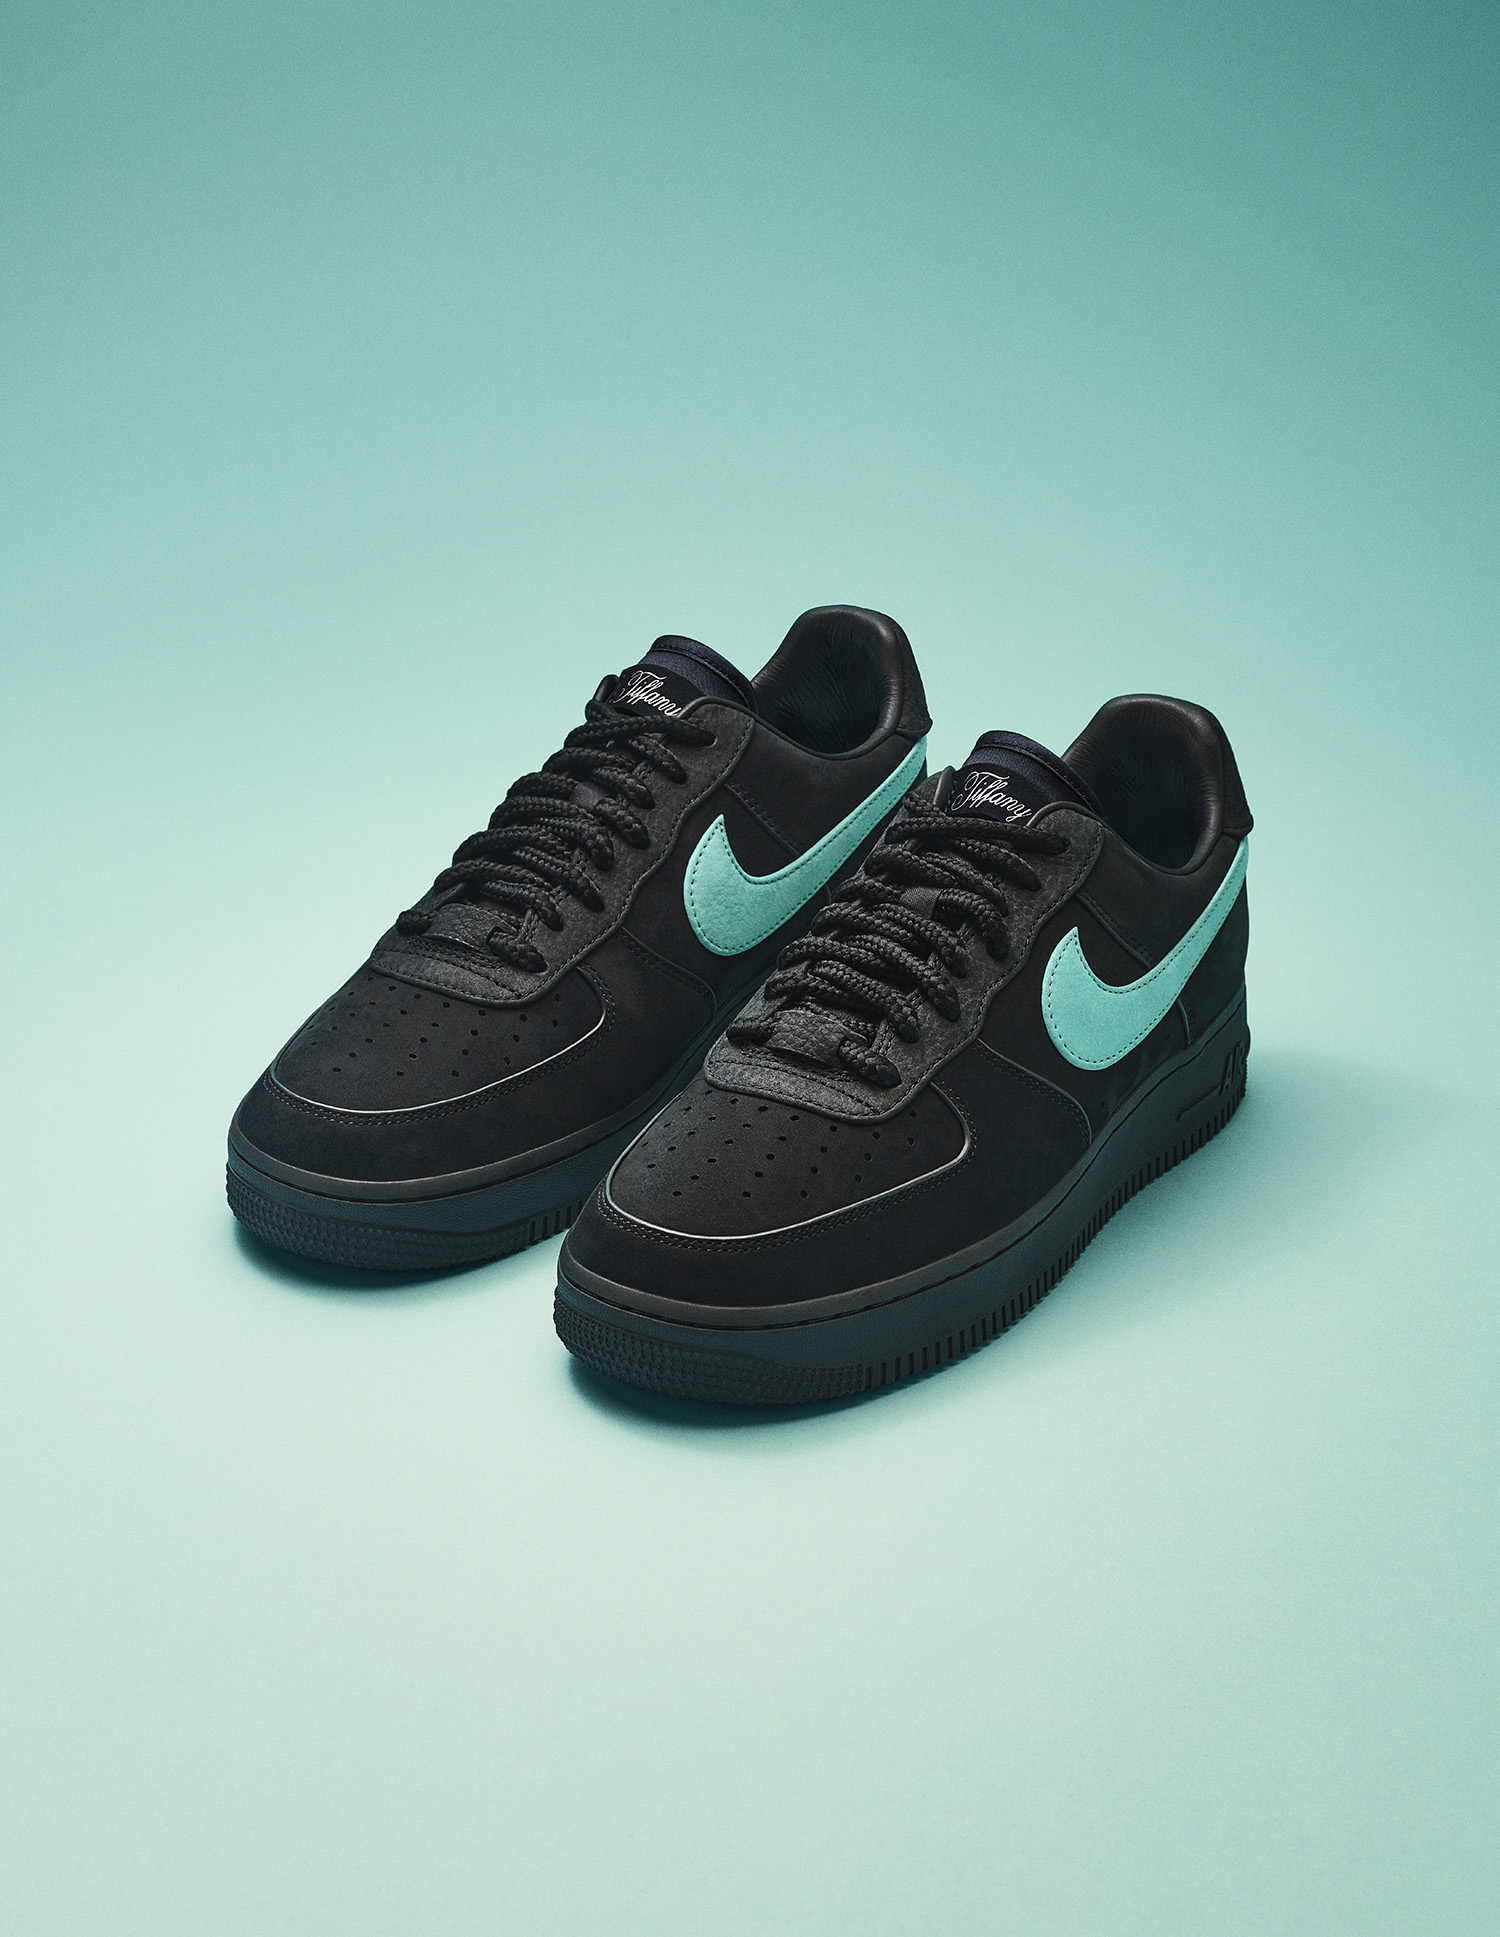 TIFFANY  CO. × NIKE COLLABORATION SWAG HOMMES